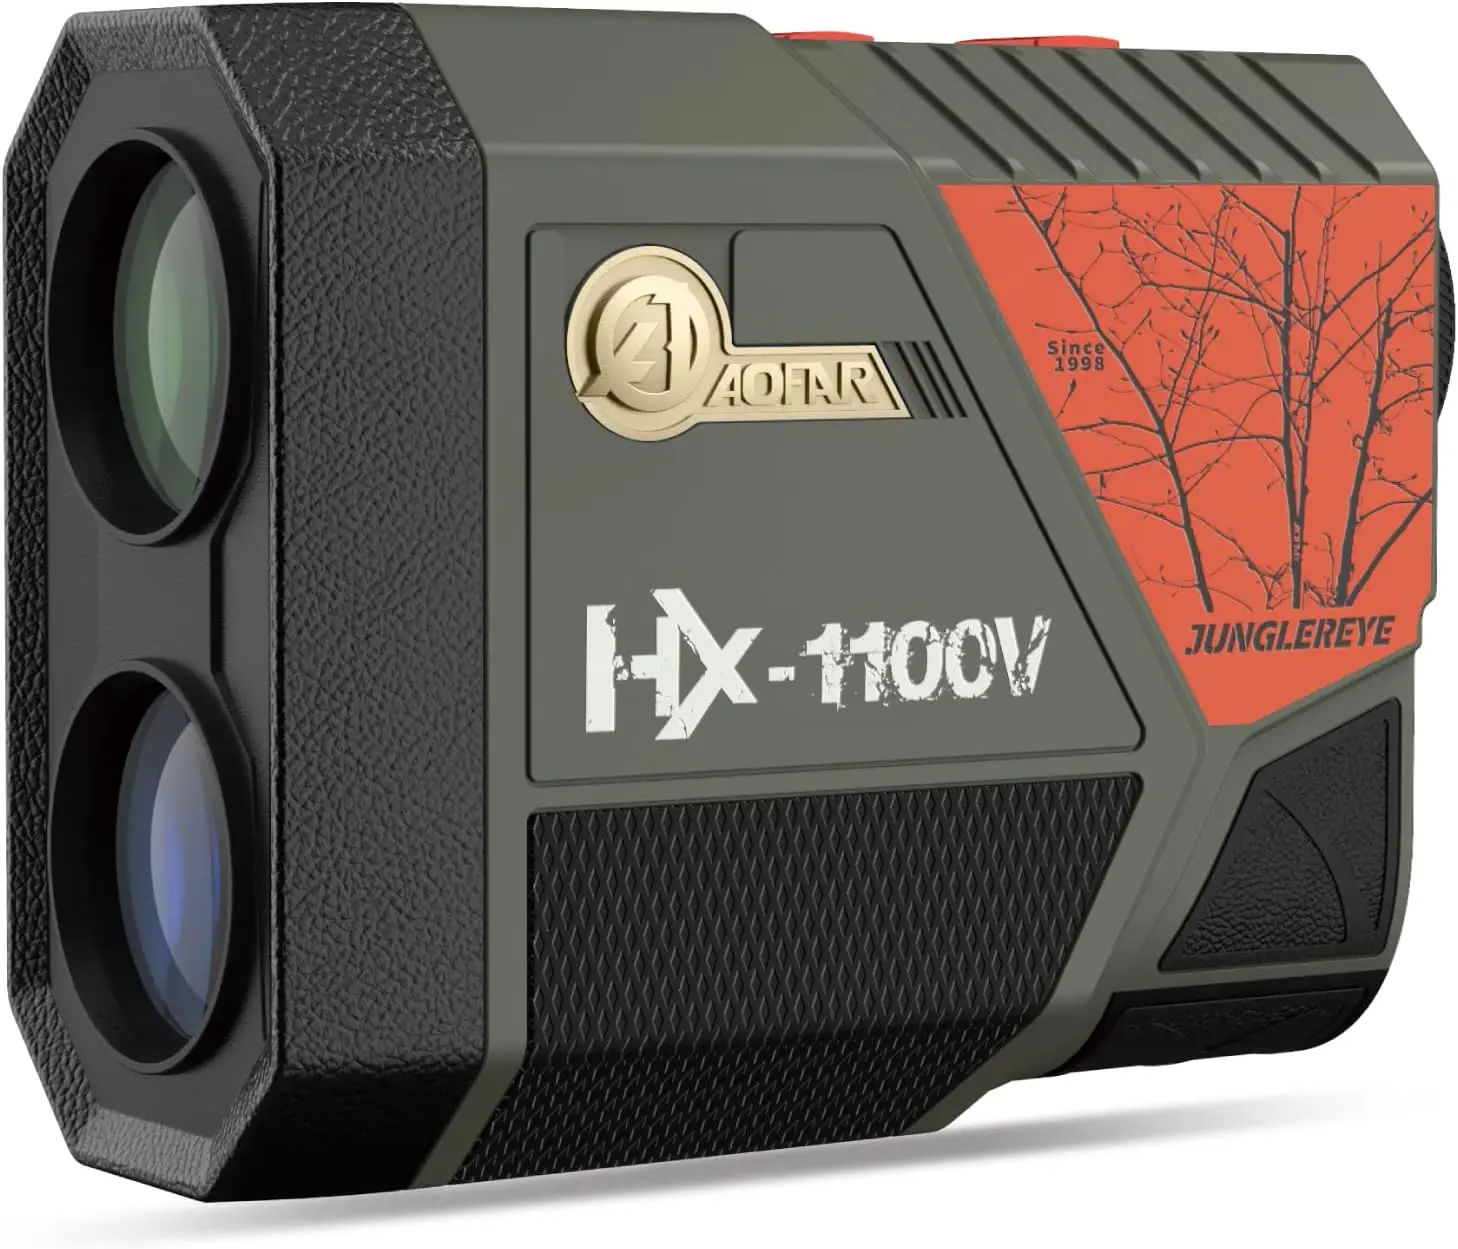 

HX-1100V Rangefinder for Hunting Archery, 1100 Yards with Angle and Horizontal Distance, High-Precision for Bow Hunting with Ran